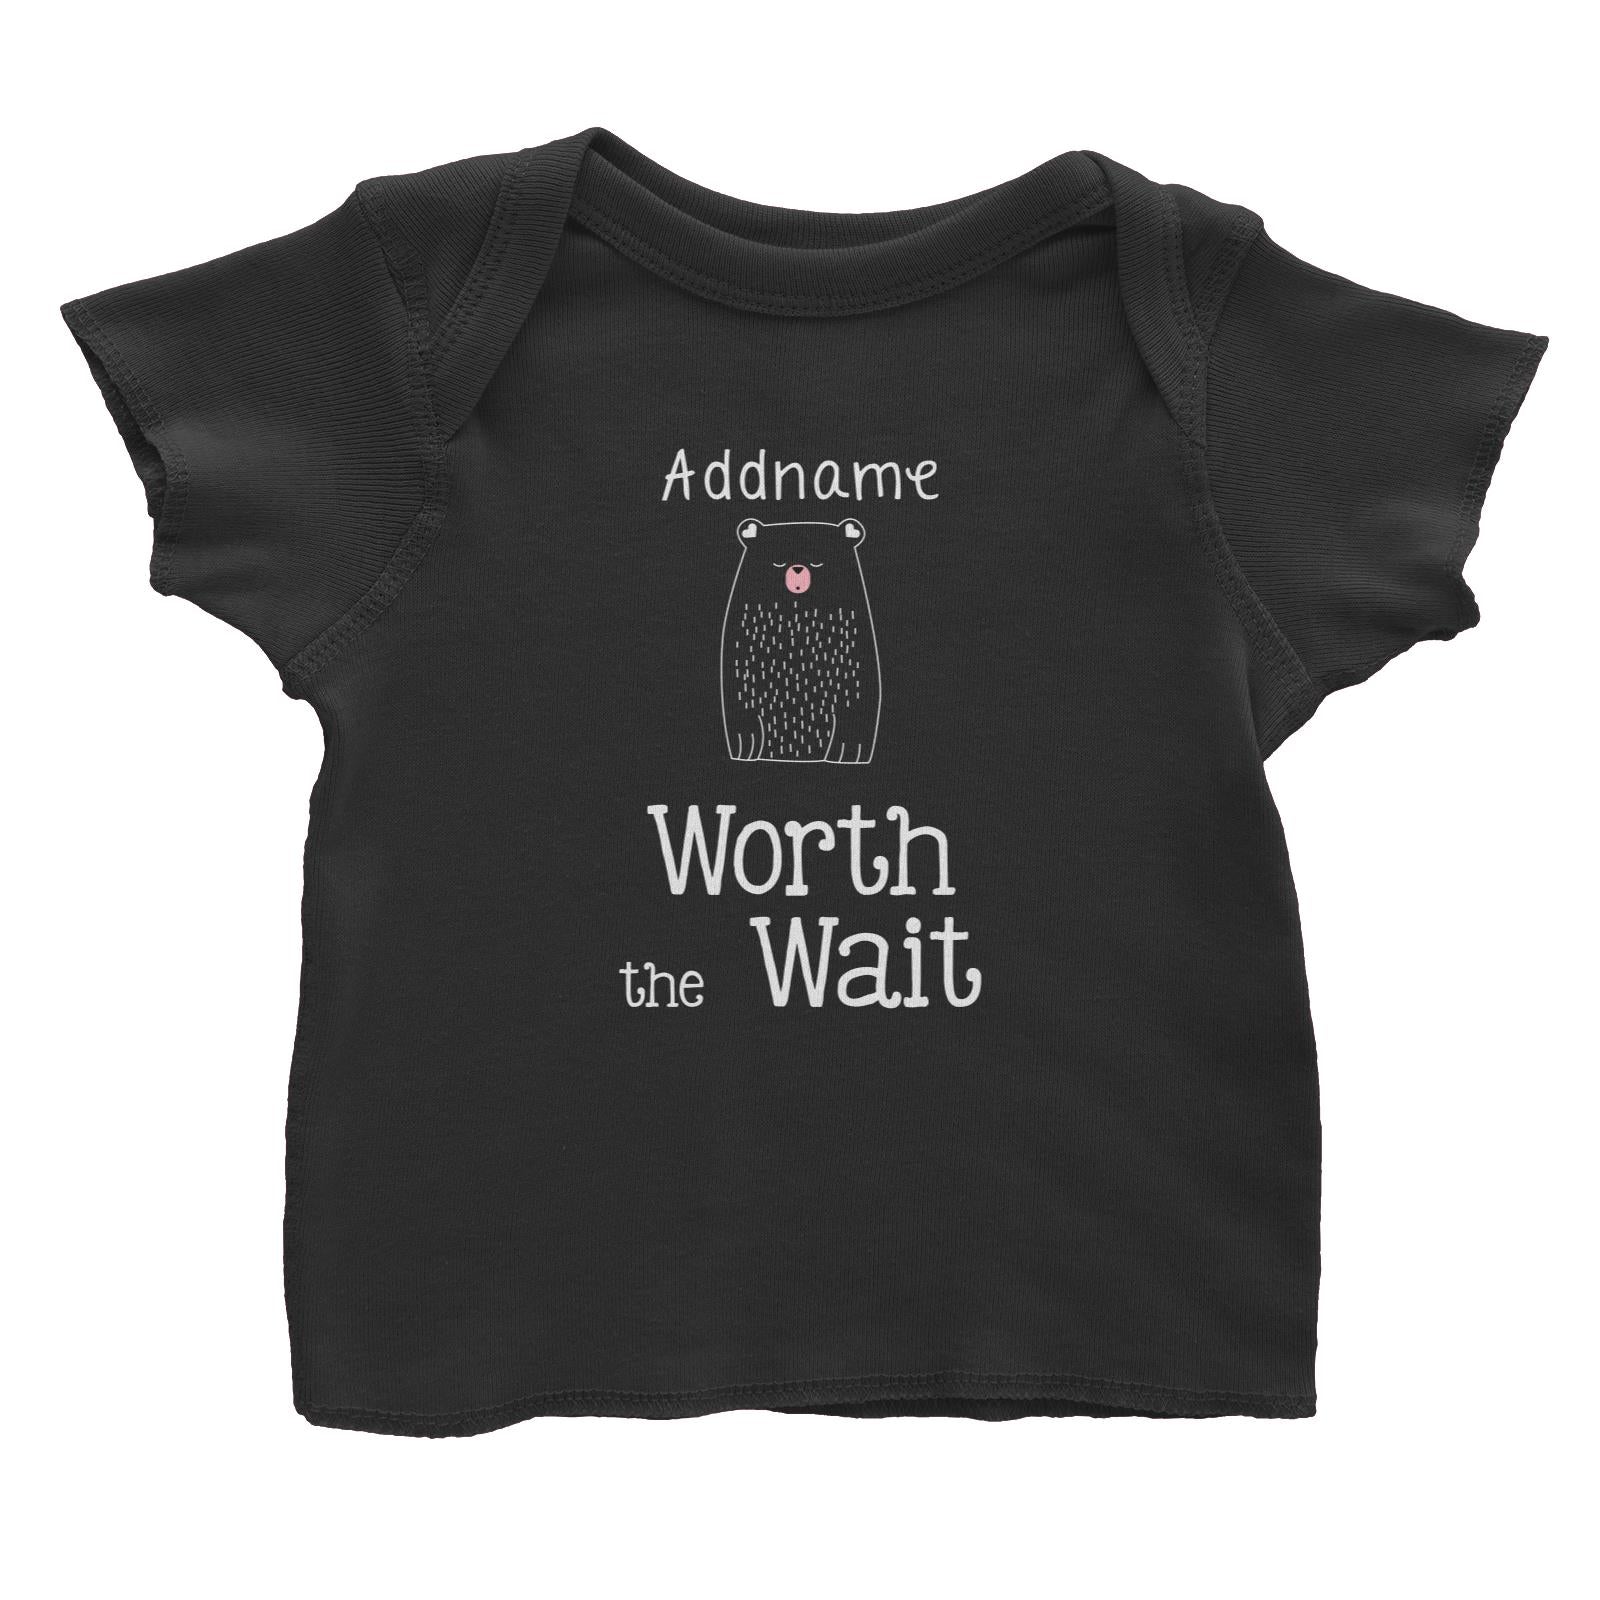 Cute Animals and Friends Series 2 Bear Addname Worth the Wait Baby T-Shirt